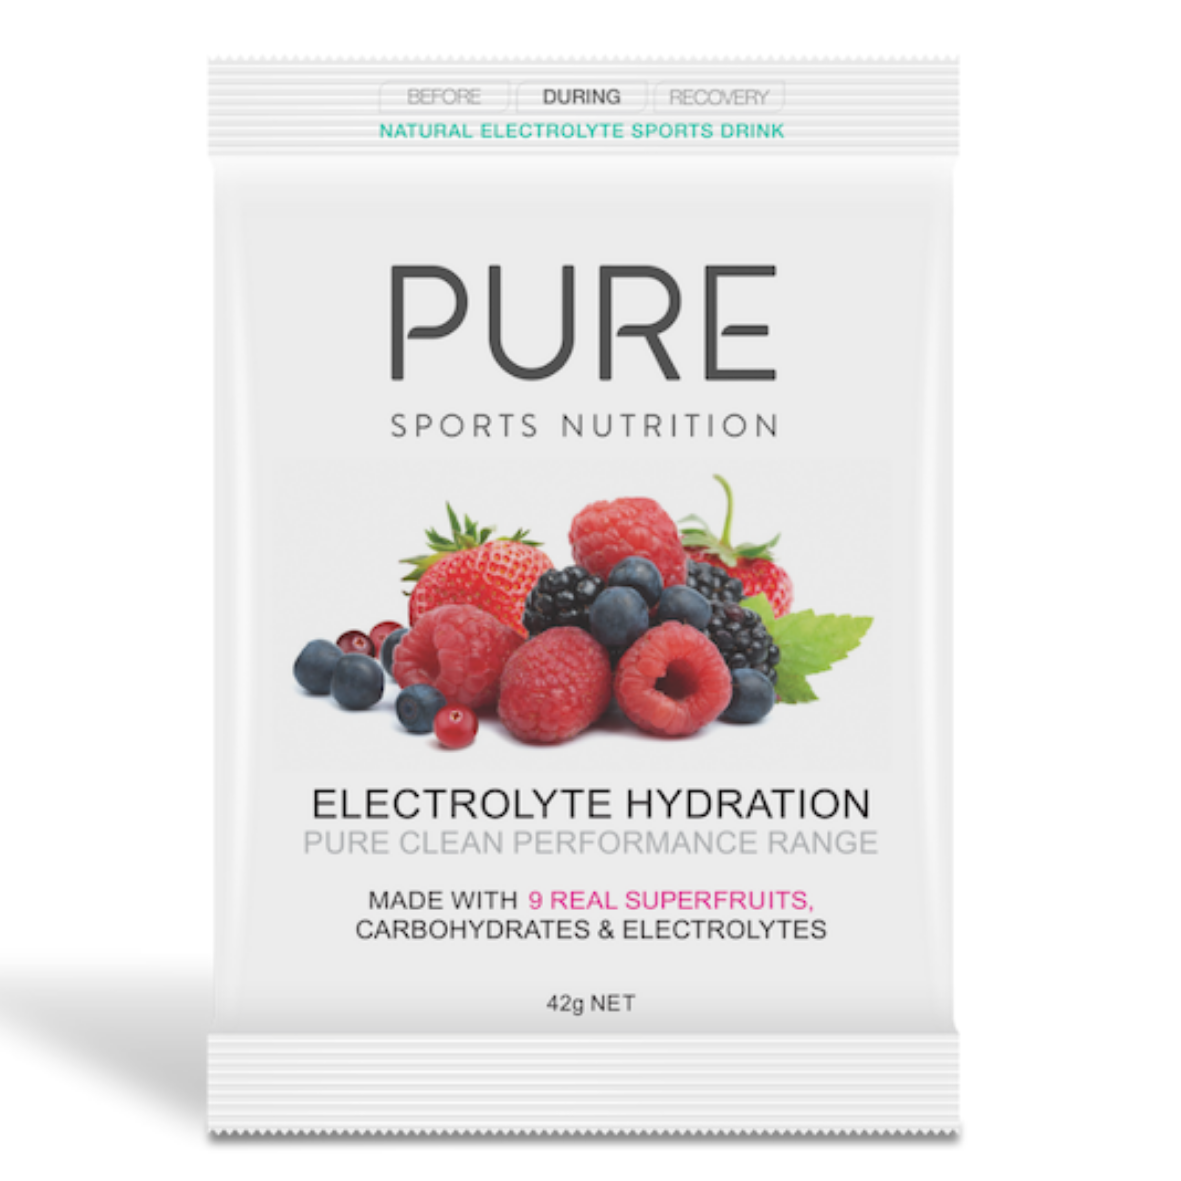 Pure Sports Nutrition - Electrolyte Hydration 42G Satchels - Superfruits